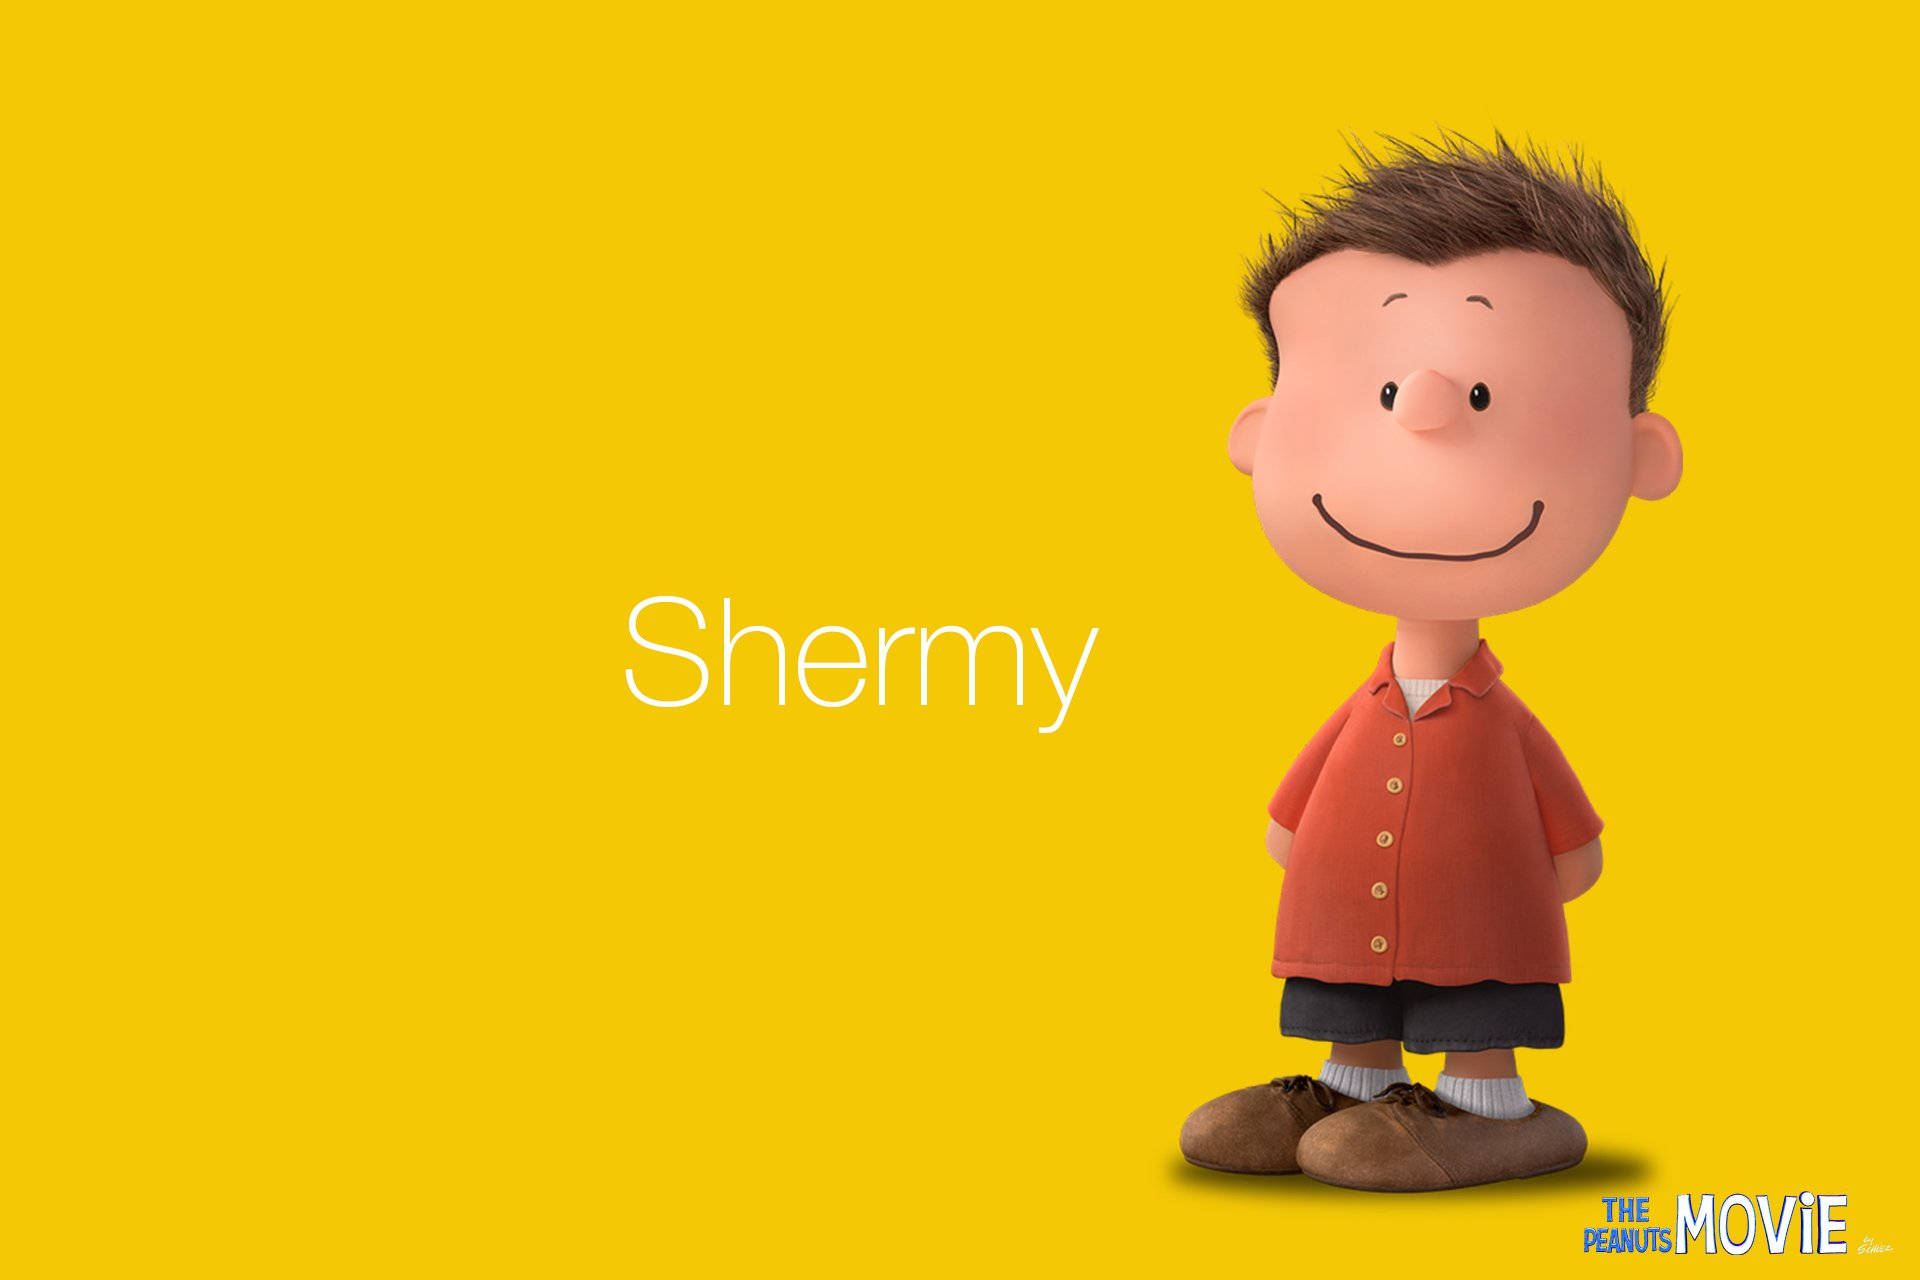 Shermy From The Peanuts Movie Wallpaper